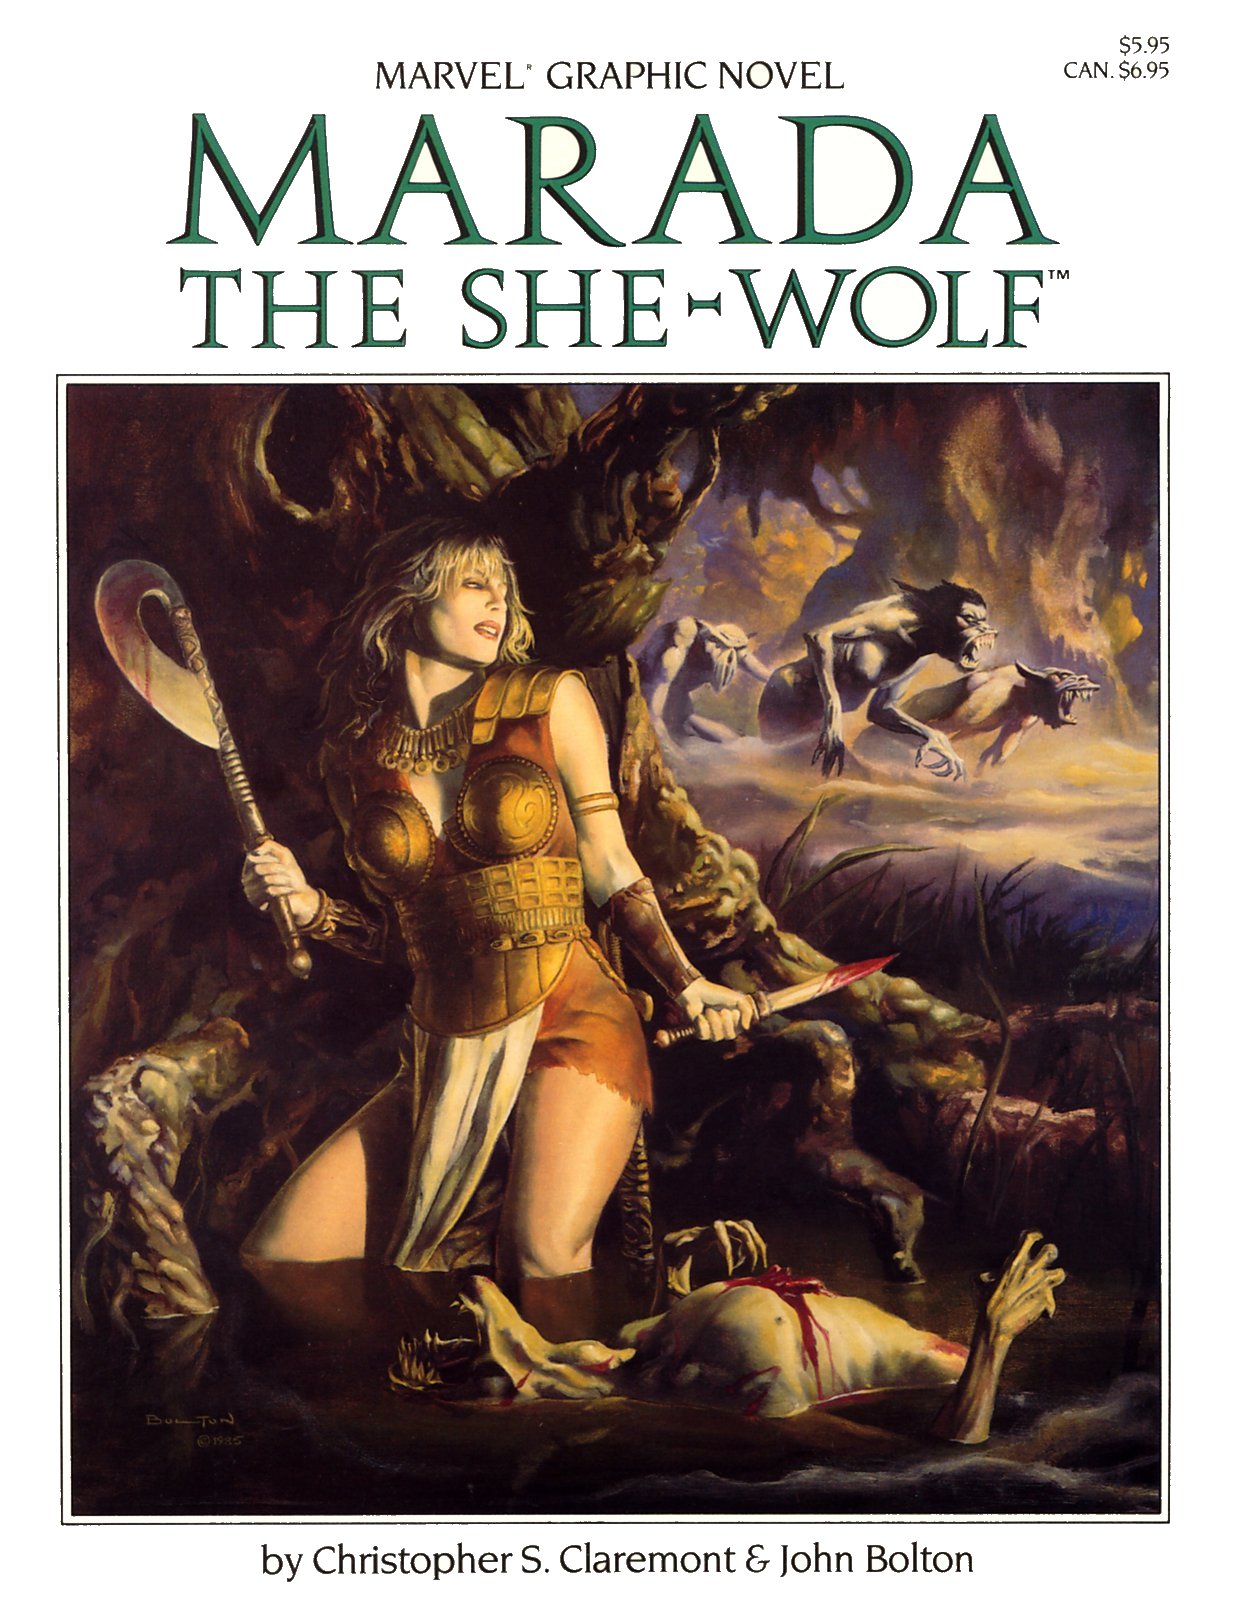 Read online Marvel Graphic Novel comic -  Issue #21 - Marada the She-Wolf - 1